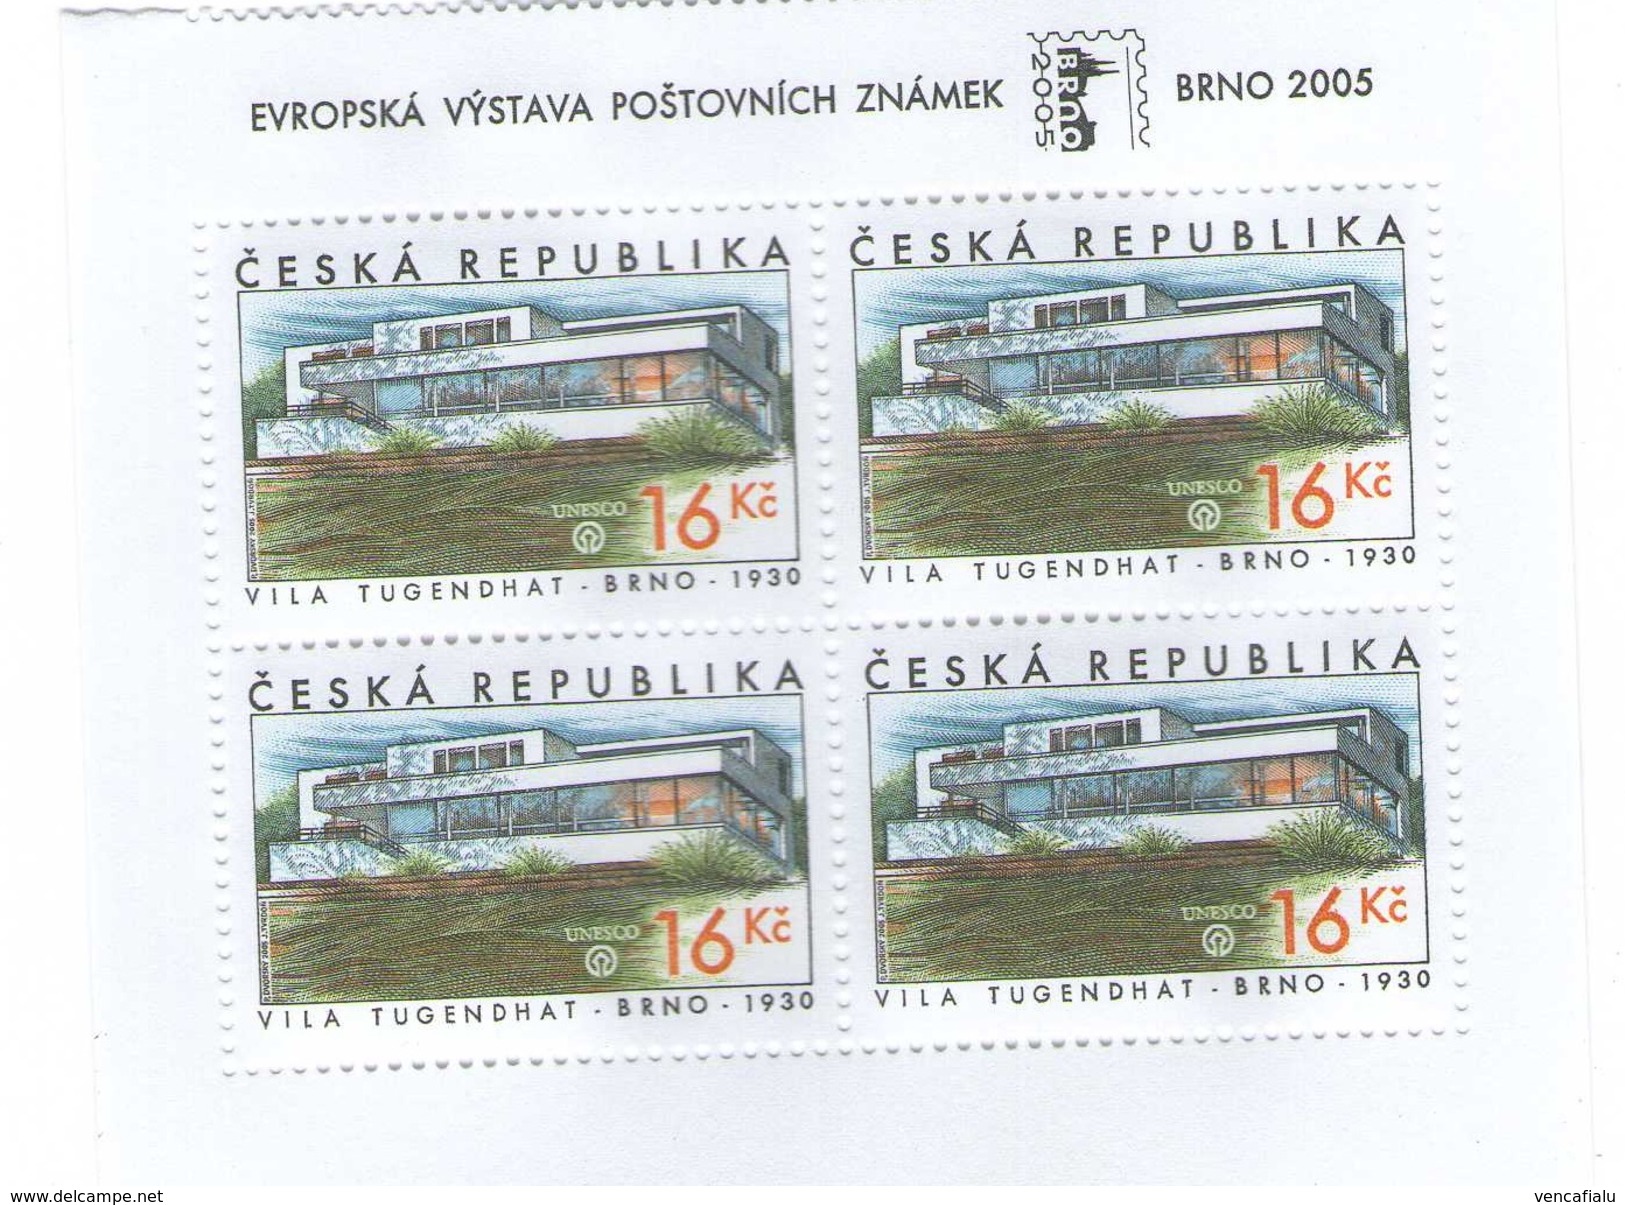 Czech Republic 2005 - Fairy Thigendtat In City Brno, 4 Stamps In Half-block With Cupon, MNH - UNESCO